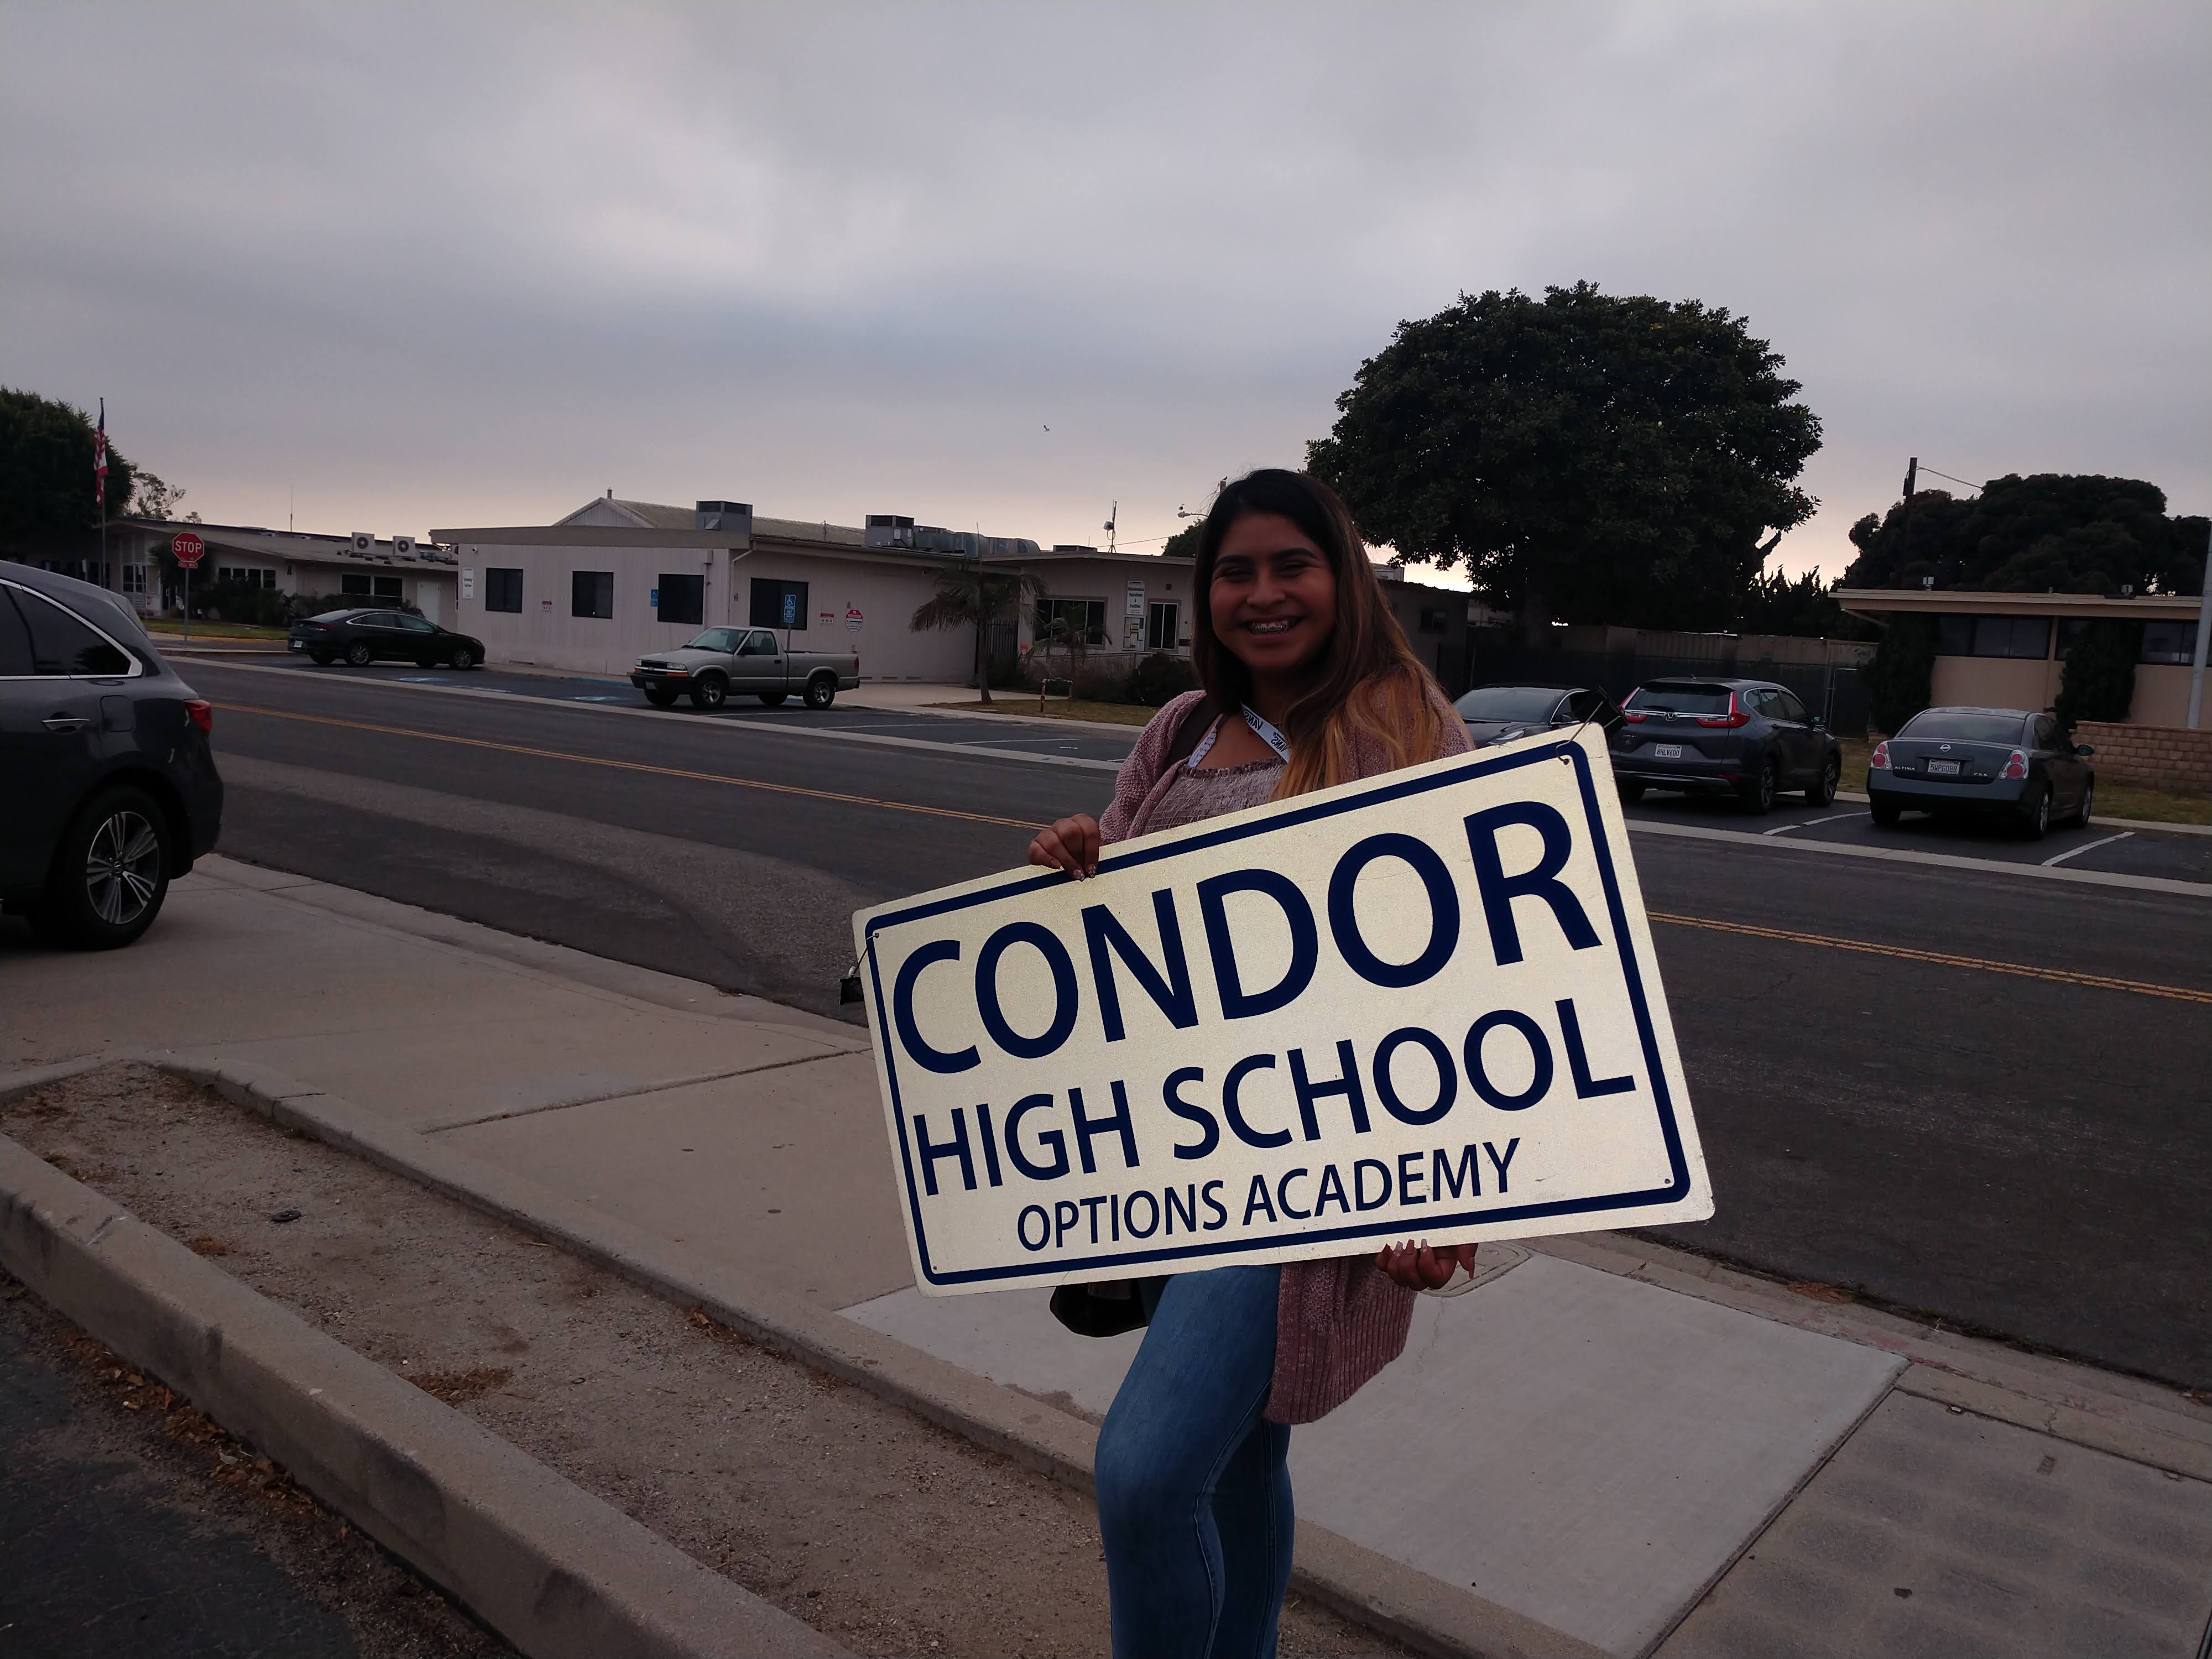 The girl is standing by the road with signboard of Condor High School